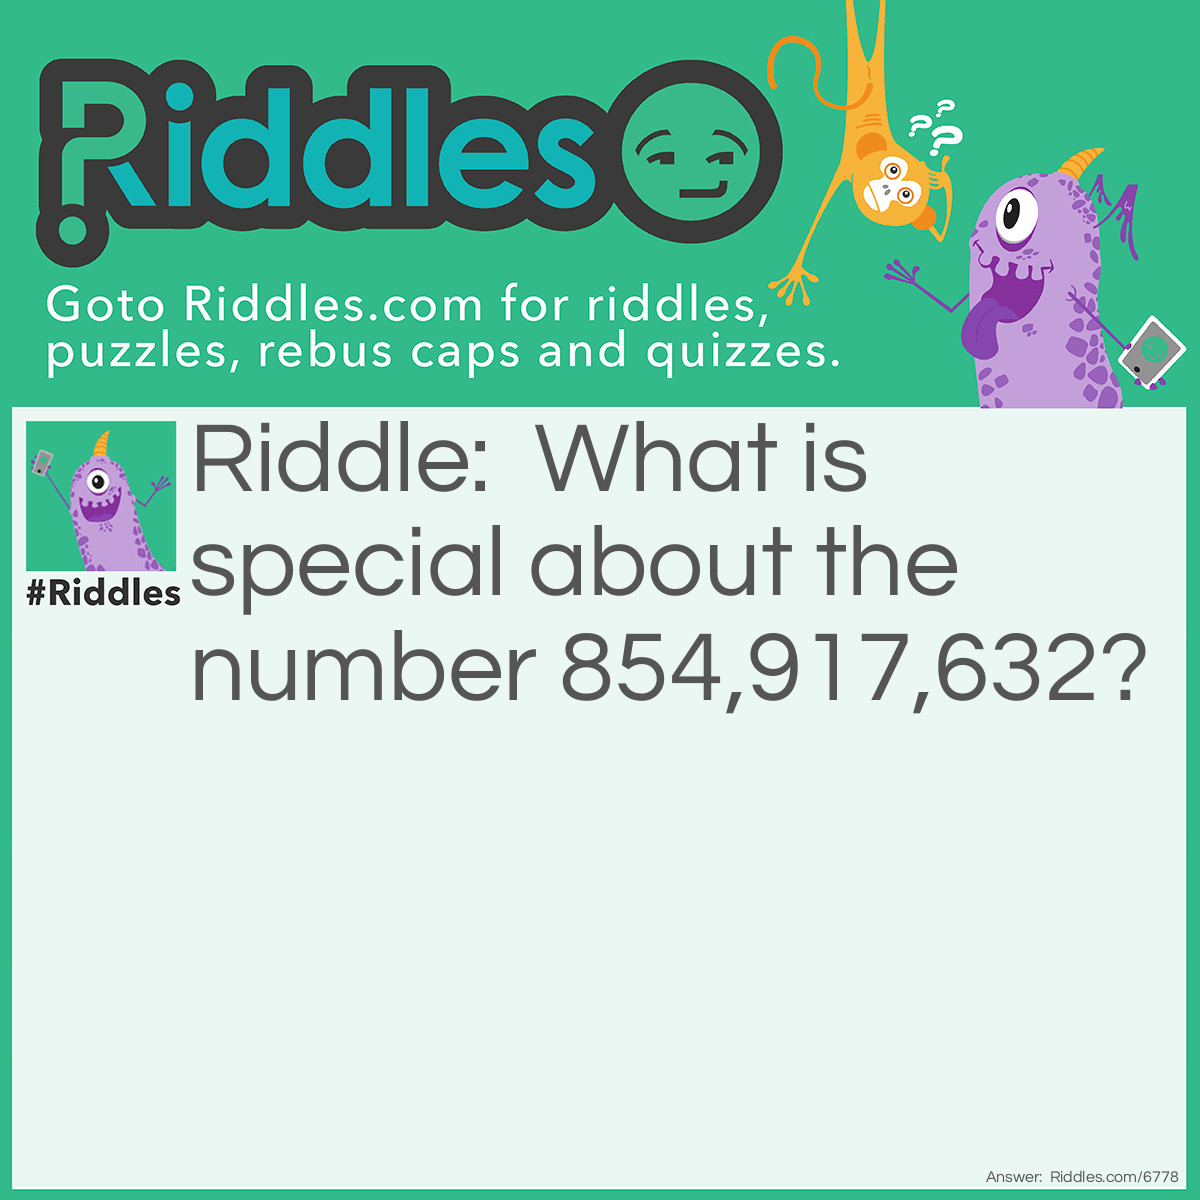 Riddle: What is special about the number 854,917,632? Answer: It contains the numbers 1-9 in alphabetical order.